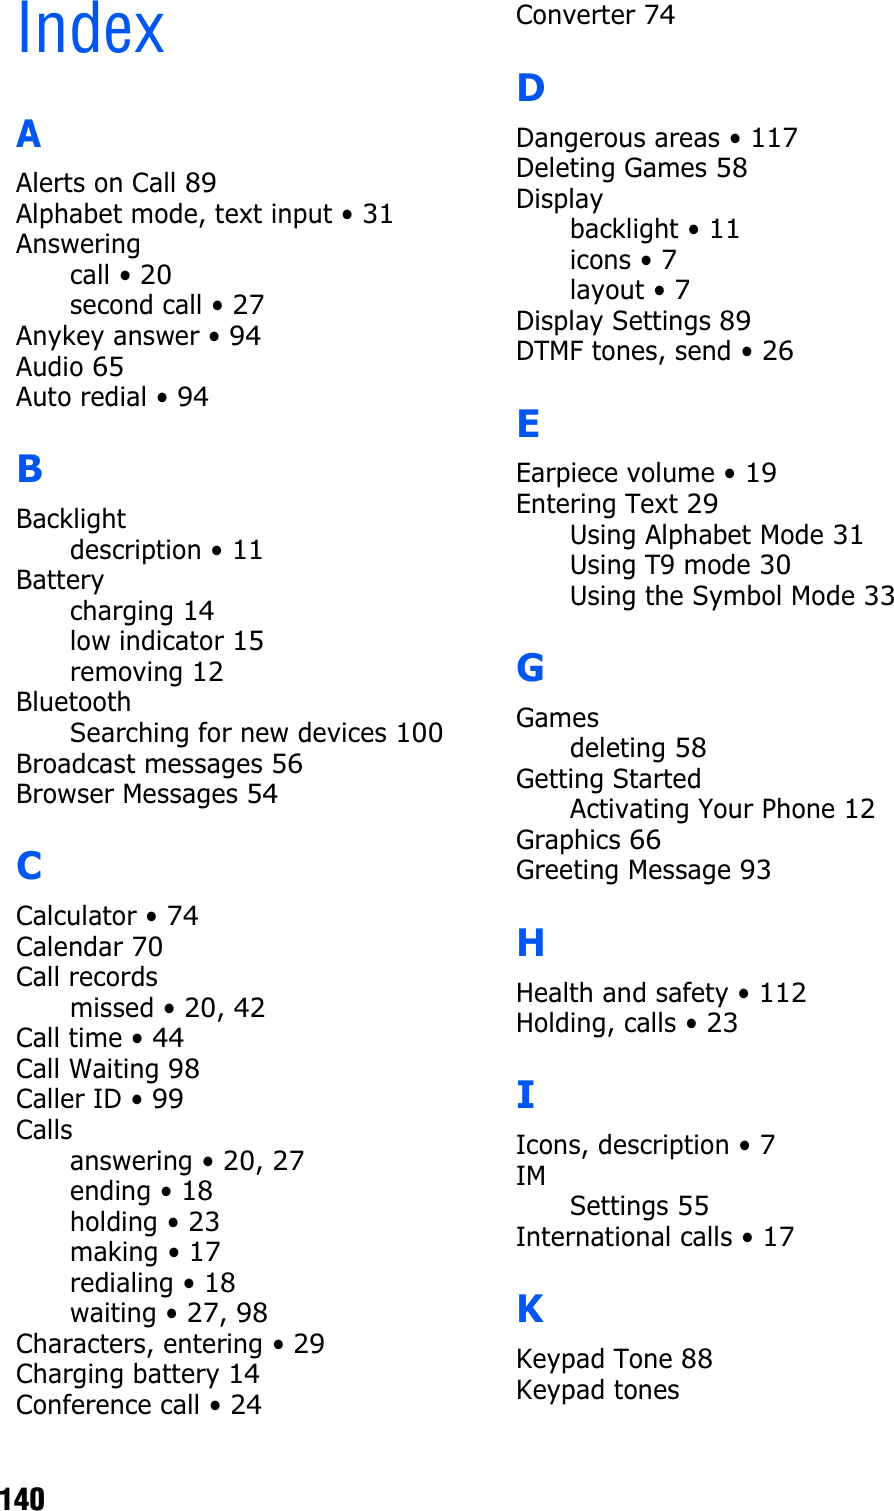                                                                                       140IndexAAlerts on Call 89Alphabet mode, text input • 31Answeringcall • 20second call • 27Anykey answer • 94Audio 65Auto redial • 94BBacklightdescription • 11Batterycharging 14low indicator 15removing 12BluetoothSearching for new devices 100Broadcast messages 56Browser Messages 54CCalculator • 74Calendar 70Call recordsmissed • 20,42Call time • 44Call Waiting 98Caller ID • 99Callsanswering • 20,27ending • 18holding • 23making • 17redialing • 18waiting • 27,98Characters, entering • 29Charging battery 14Conference call • 24Converter 74DDangerous areas • 117Deleting Games 58Displaybacklight • 11icons • 7layout • 7Display Settings 89DTMF tones, send • 26EEarpiece volume • 19Entering Text 29Using Alphabet Mode 31Using T9 mode 30Using the Symbol Mode 33GGamesdeleting 58Getting StartedActivating Your Phone 12Graphics 66Greeting Message 93HHealth and safety • 112Holding, calls • 23IIcons, description • 7IMSettings 55International calls • 17KKeypad Tone 88Keypad tones